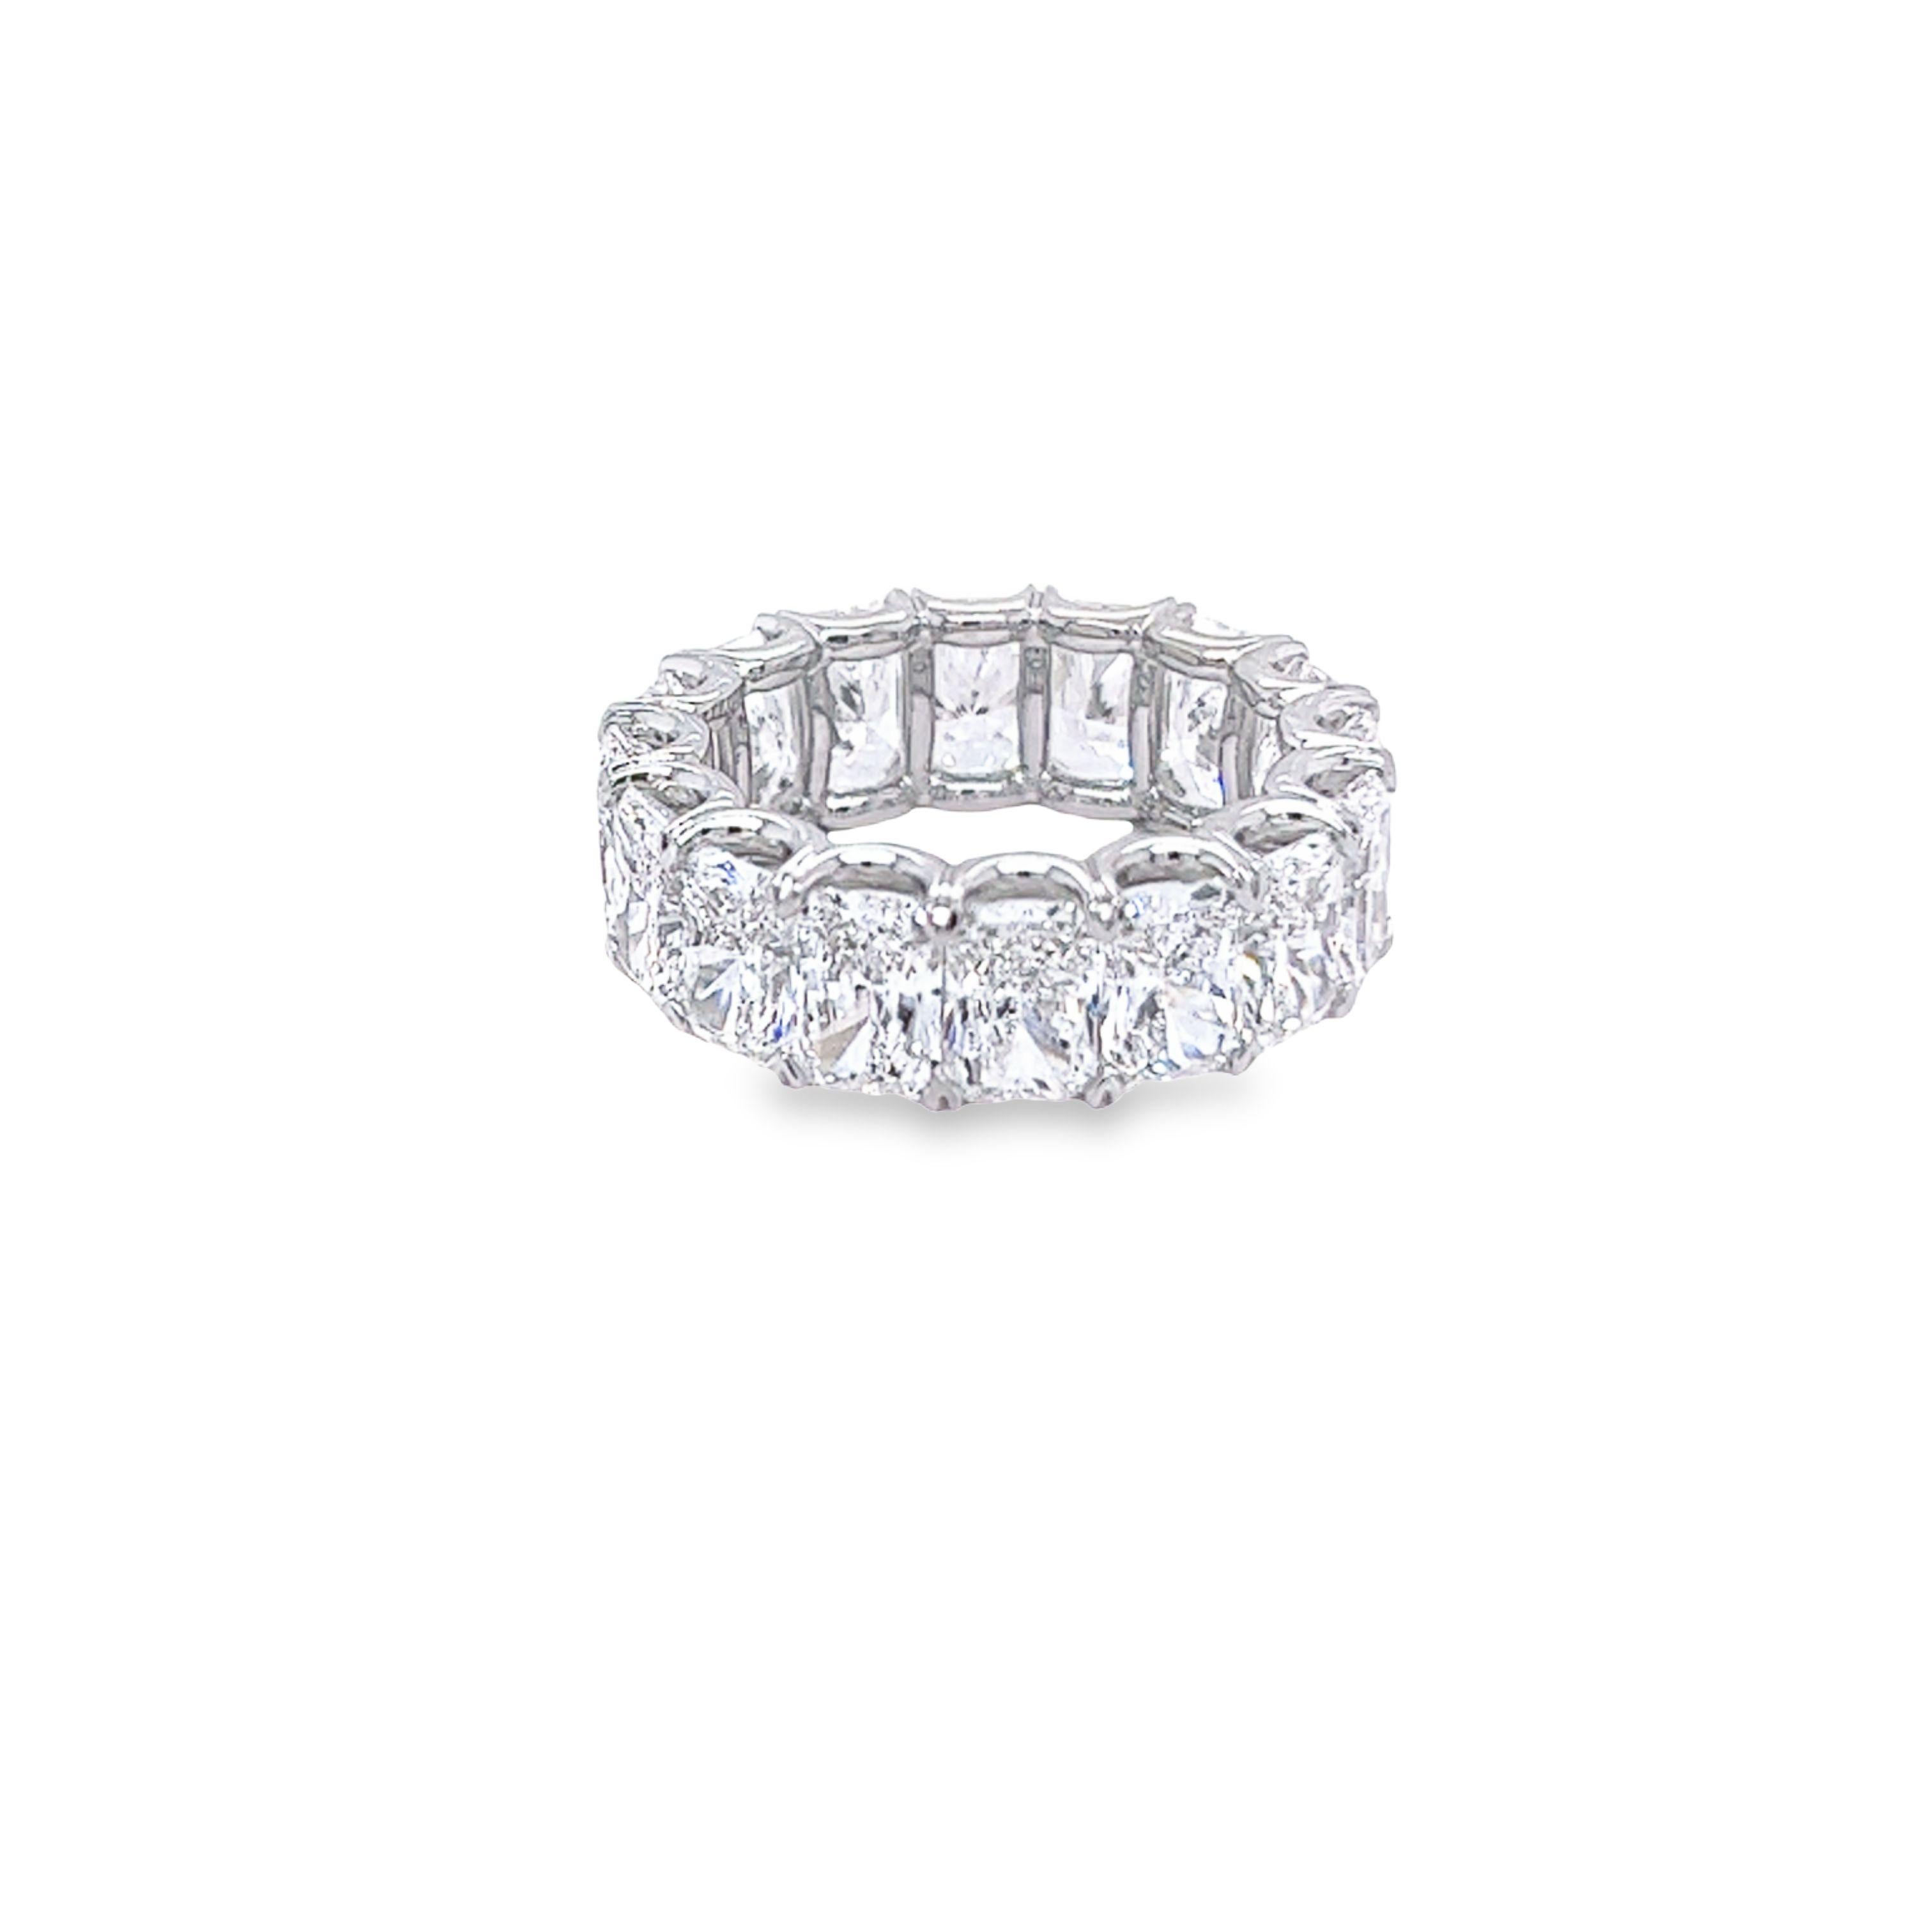 David Rosenberg 11.31 Total Carats Radiant Cut GIA Diamond Eternity Wedding Band In New Condition For Sale In Boca Raton, FL